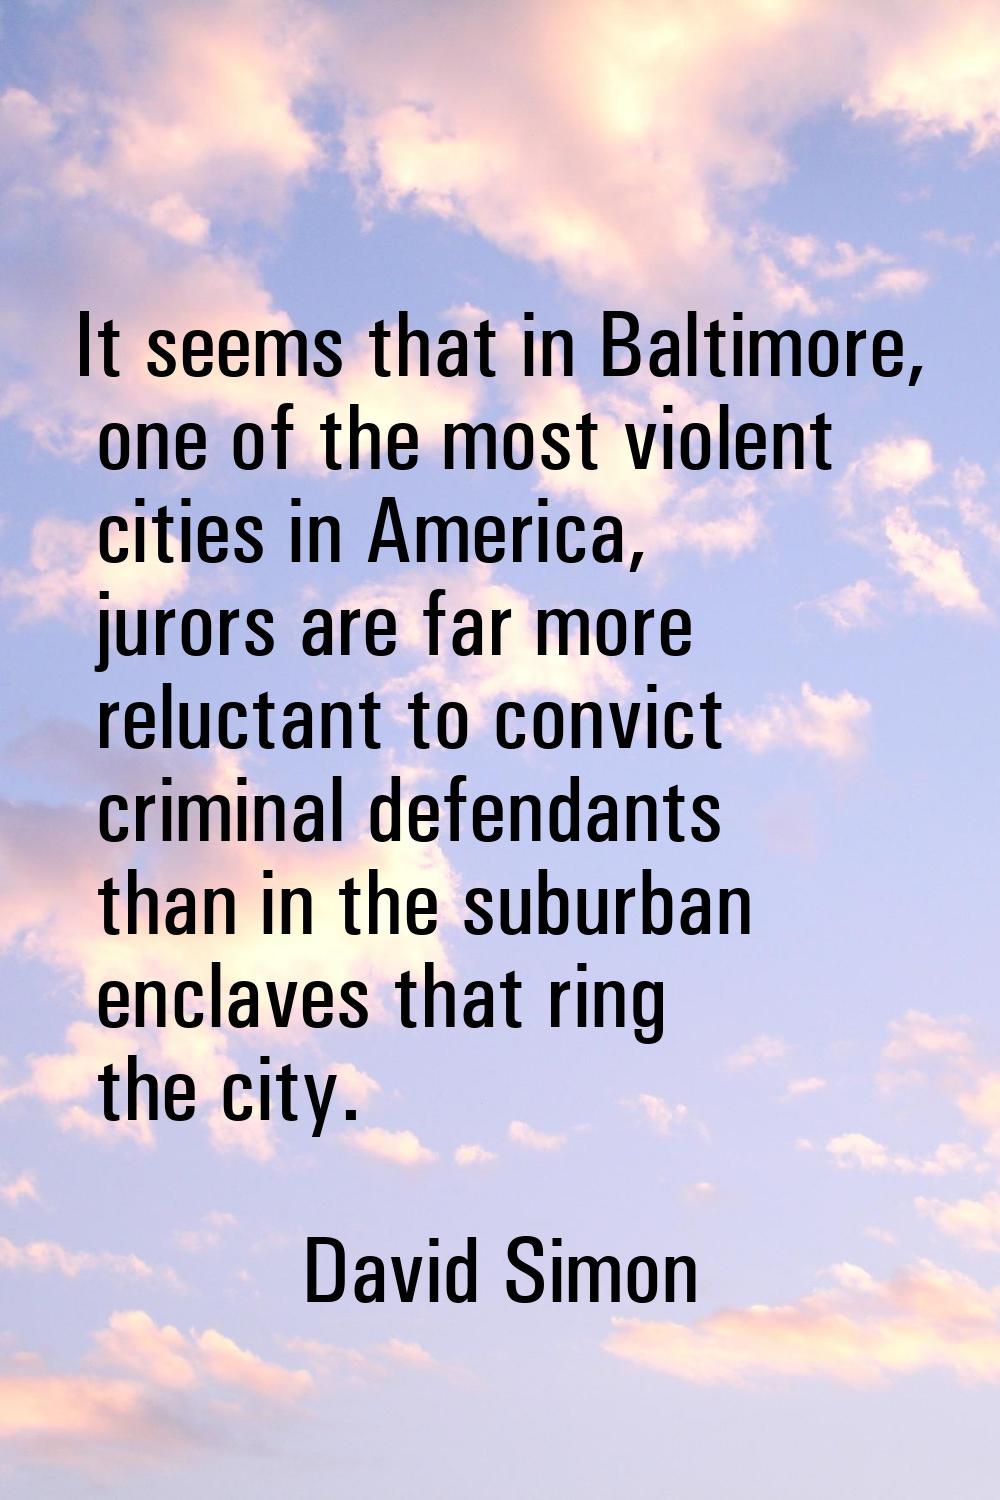 It seems that in Baltimore, one of the most violent cities in America, jurors are far more reluctan